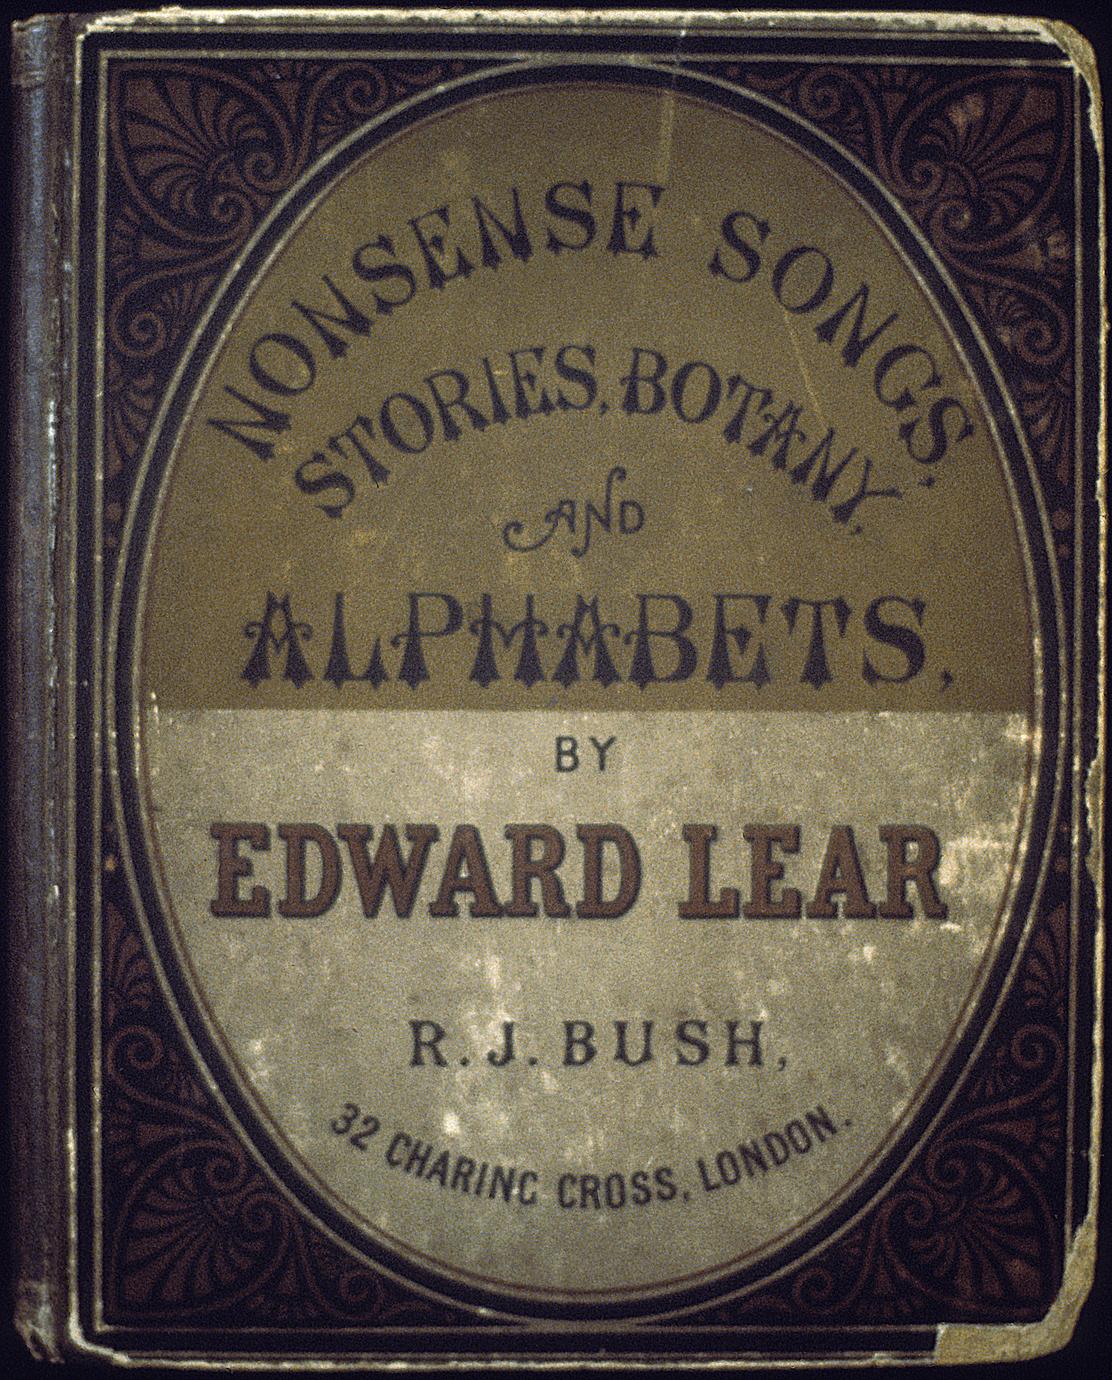 Collection of Edward Lear's books (1 of 3)